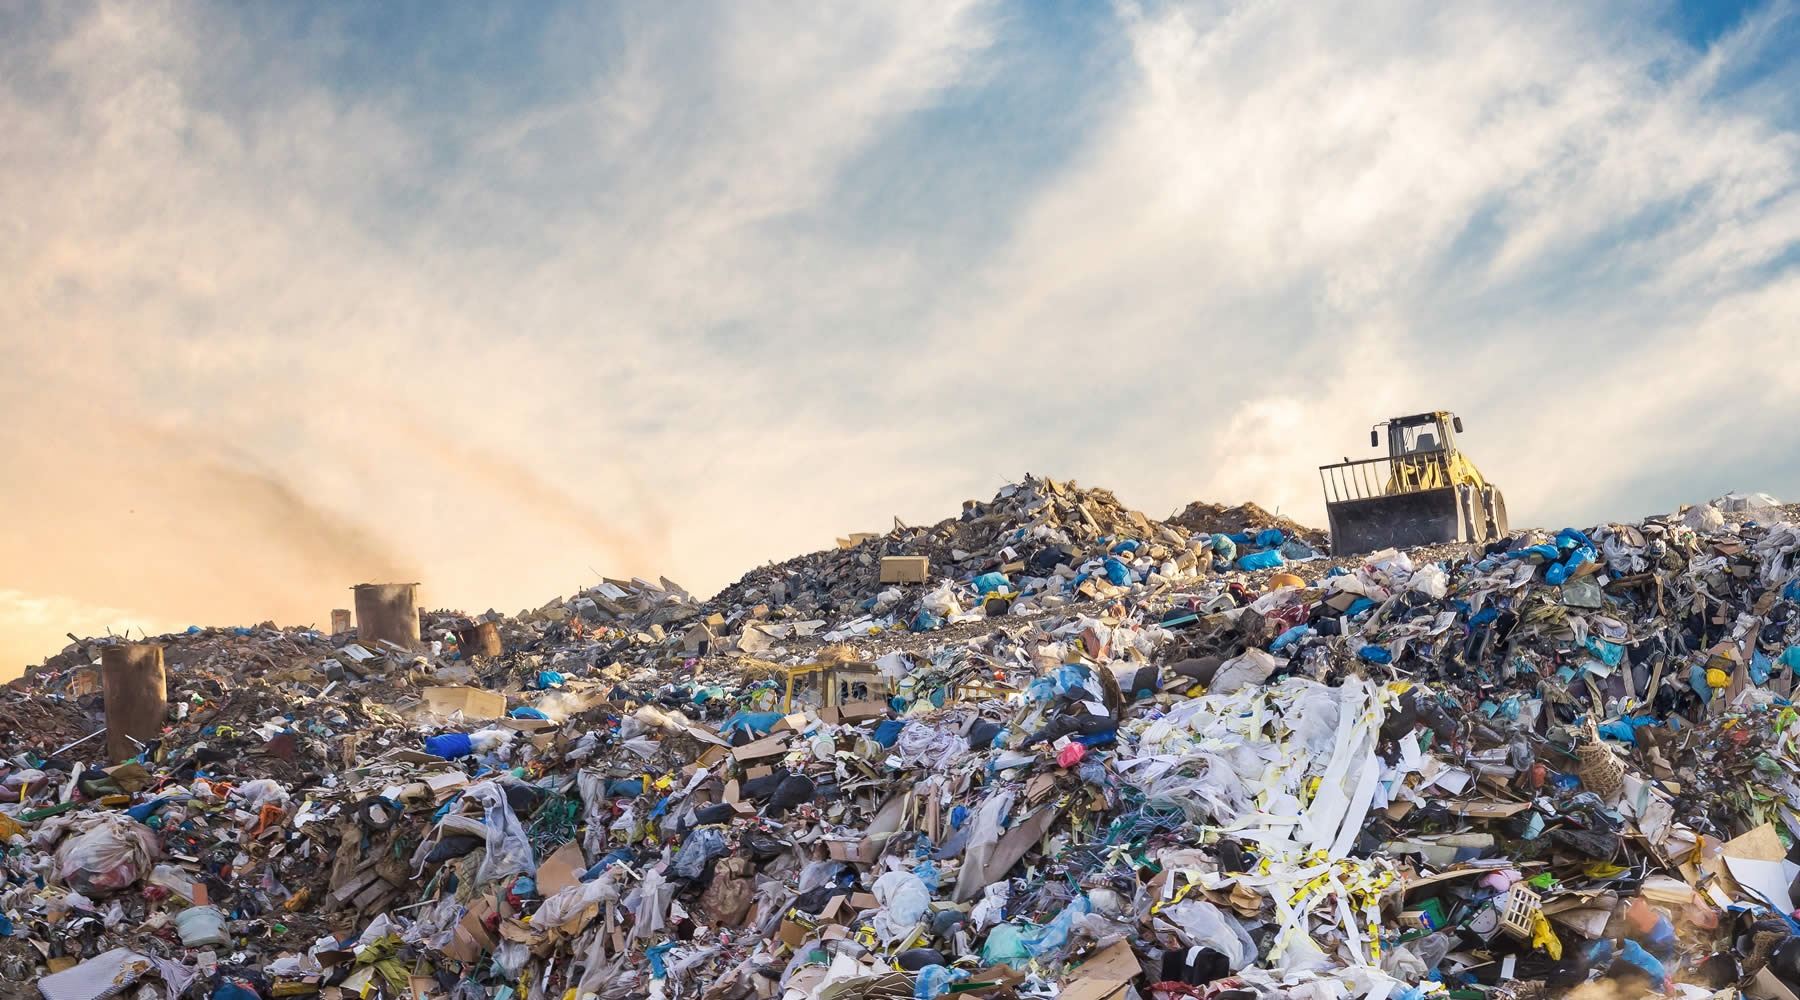 Coming Soon: 100% Renewable Electricity from Trash